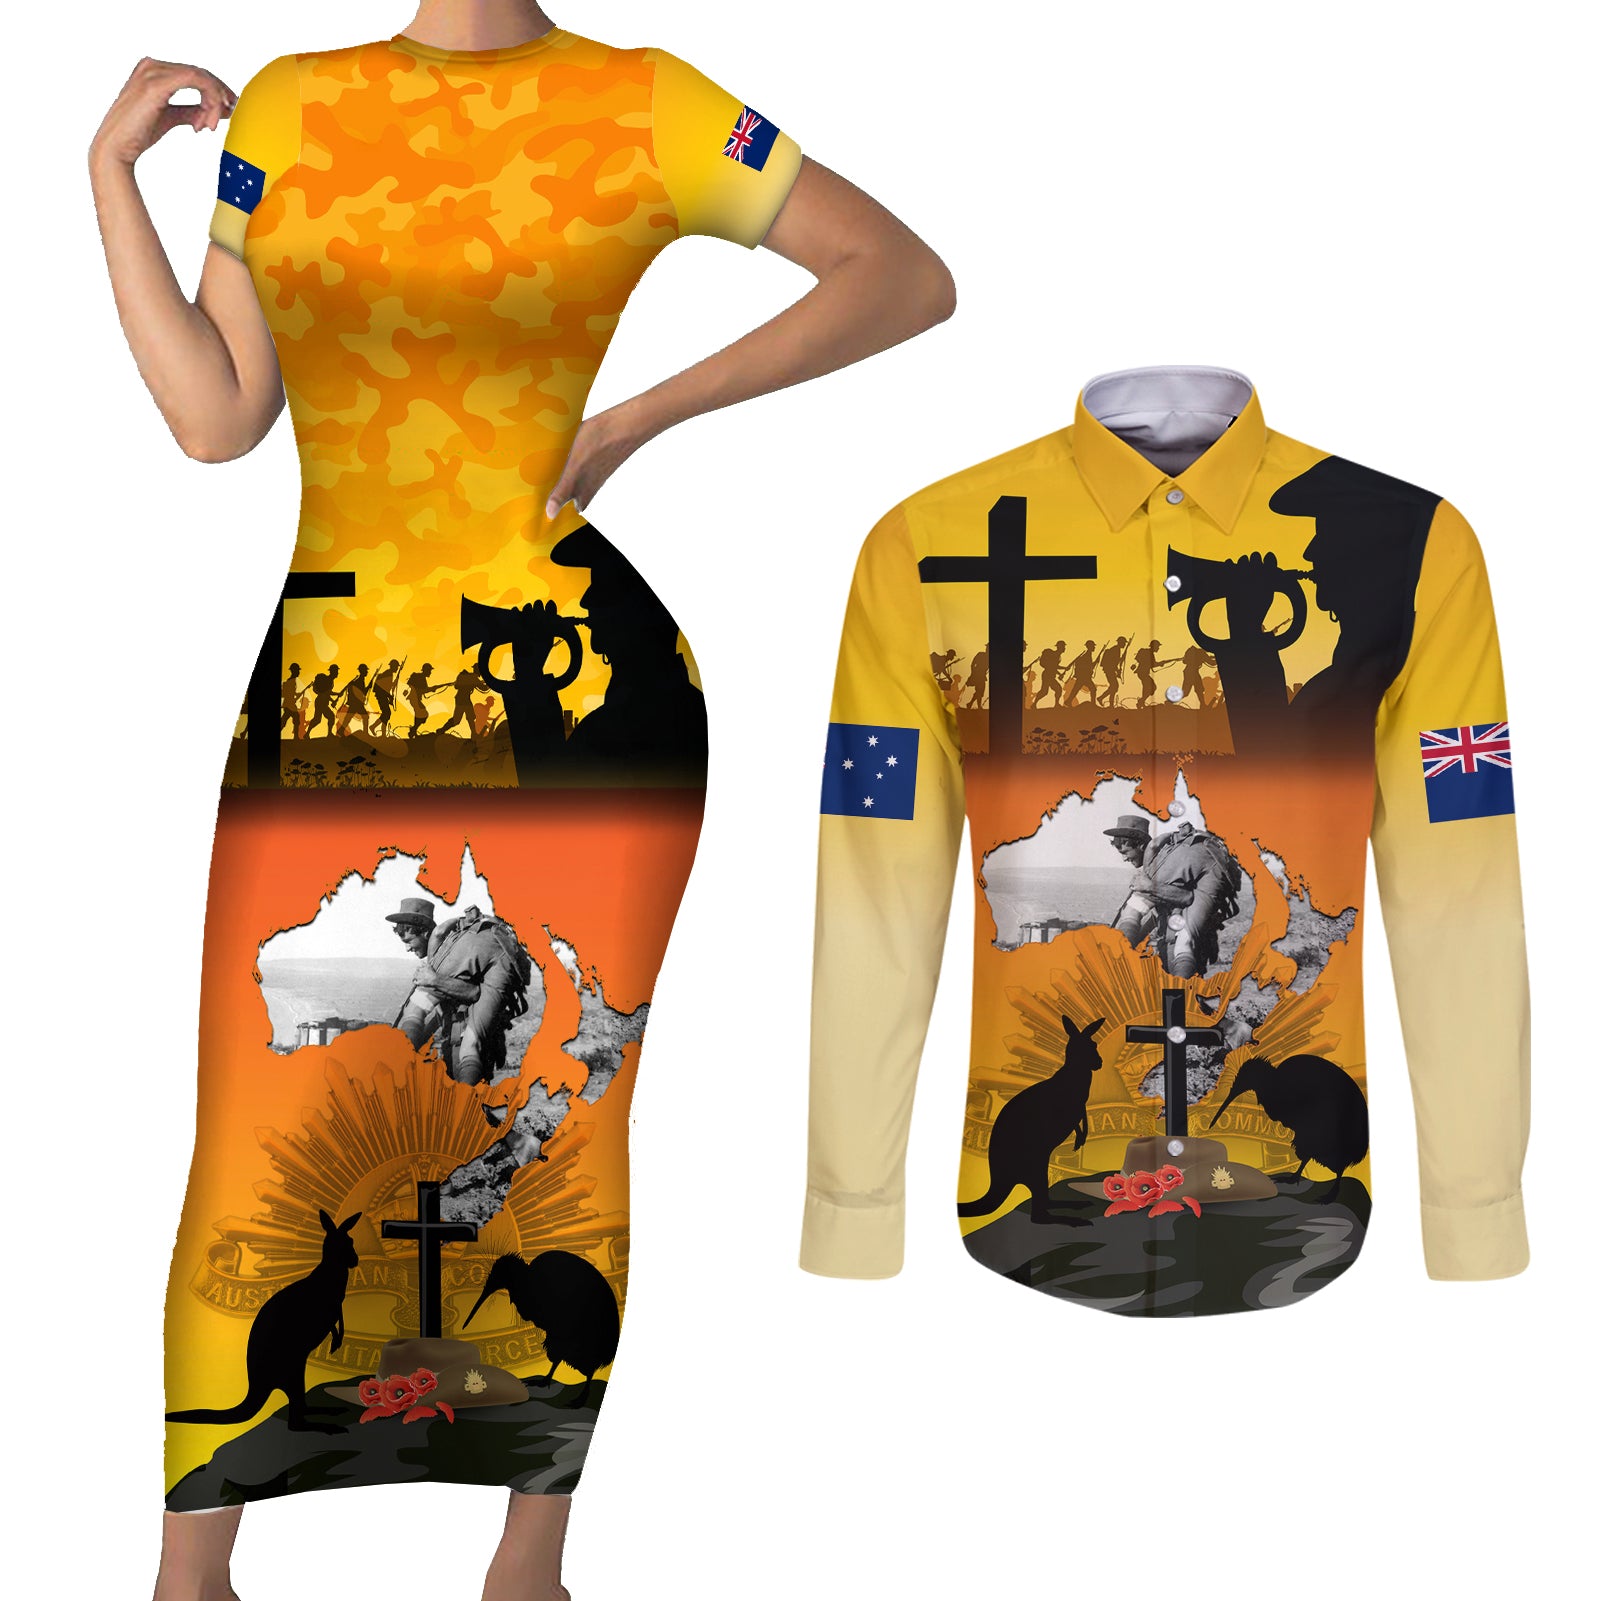 New Zealand and Australia ANZAC Day Couples Matching Short Sleeve Bodycon Dress and Long Sleeve Button Shirt Gallipoli Lest We Forget LT03 Yellow - Polynesian Pride